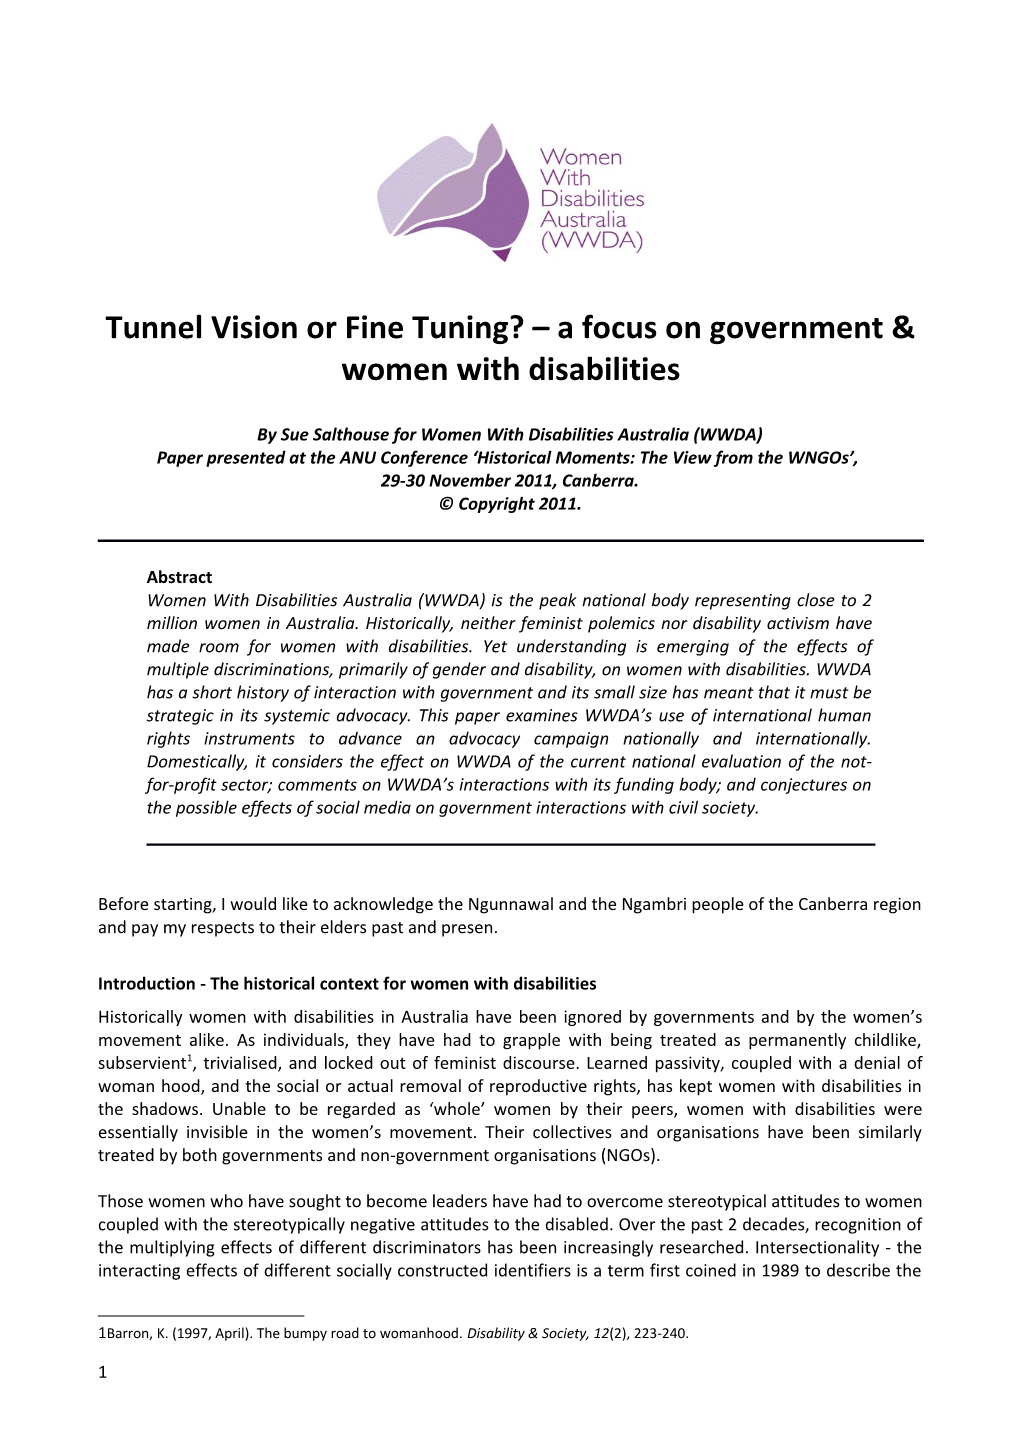 Tunnel Vision Or Fine Tuning? a Focus on Government & Women with Disabilities